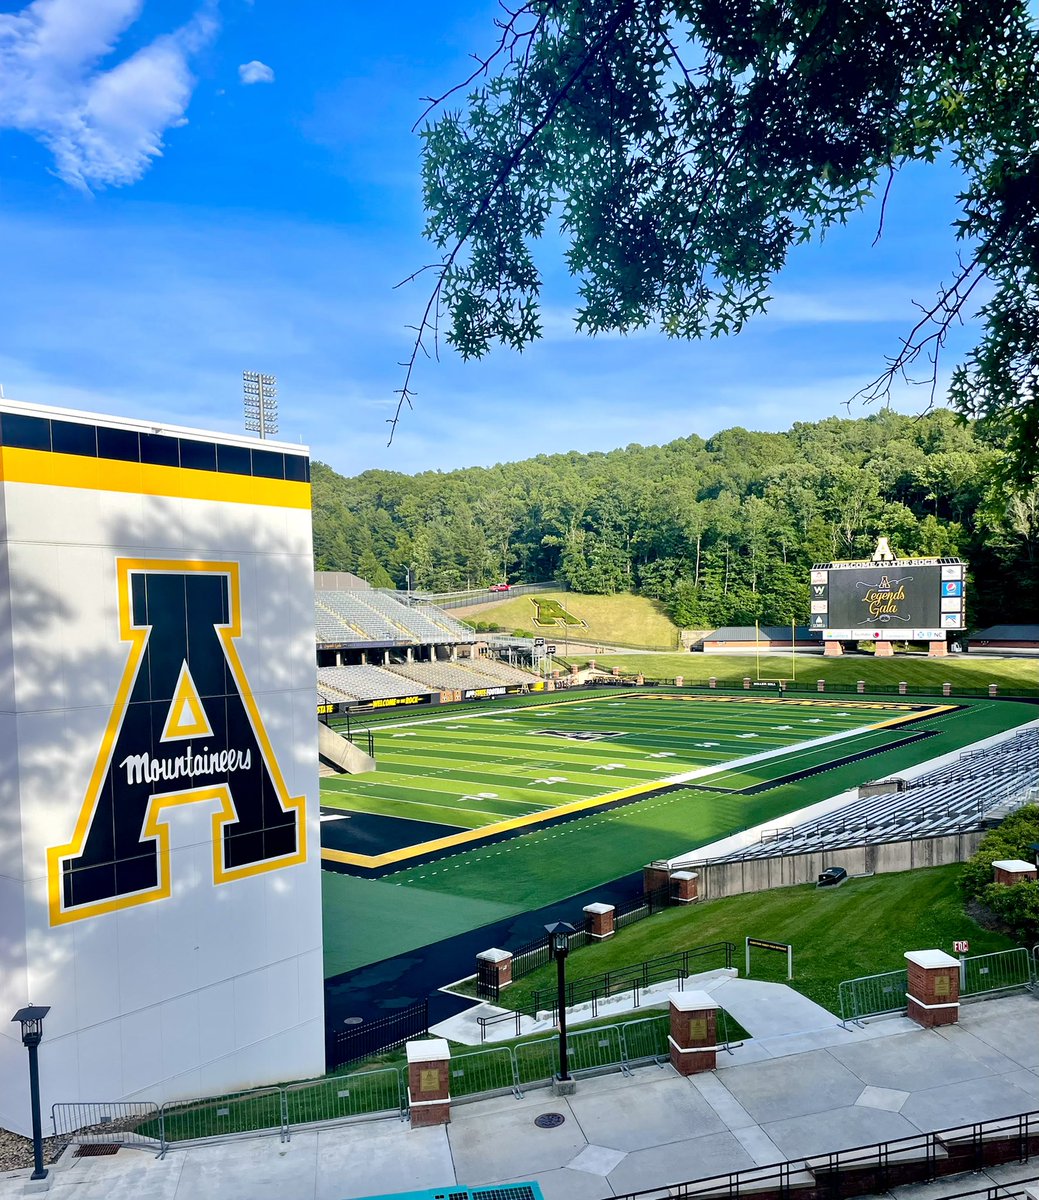 I’ll be back at @AppState_FB tomorrow for their Specialist Camp. Looking forward to another great session. #AppNation #GoApp

@coach_sclark @BrianHainesb @CoachDeGraf23 @barrettdavis4 @HKA_Tanalski